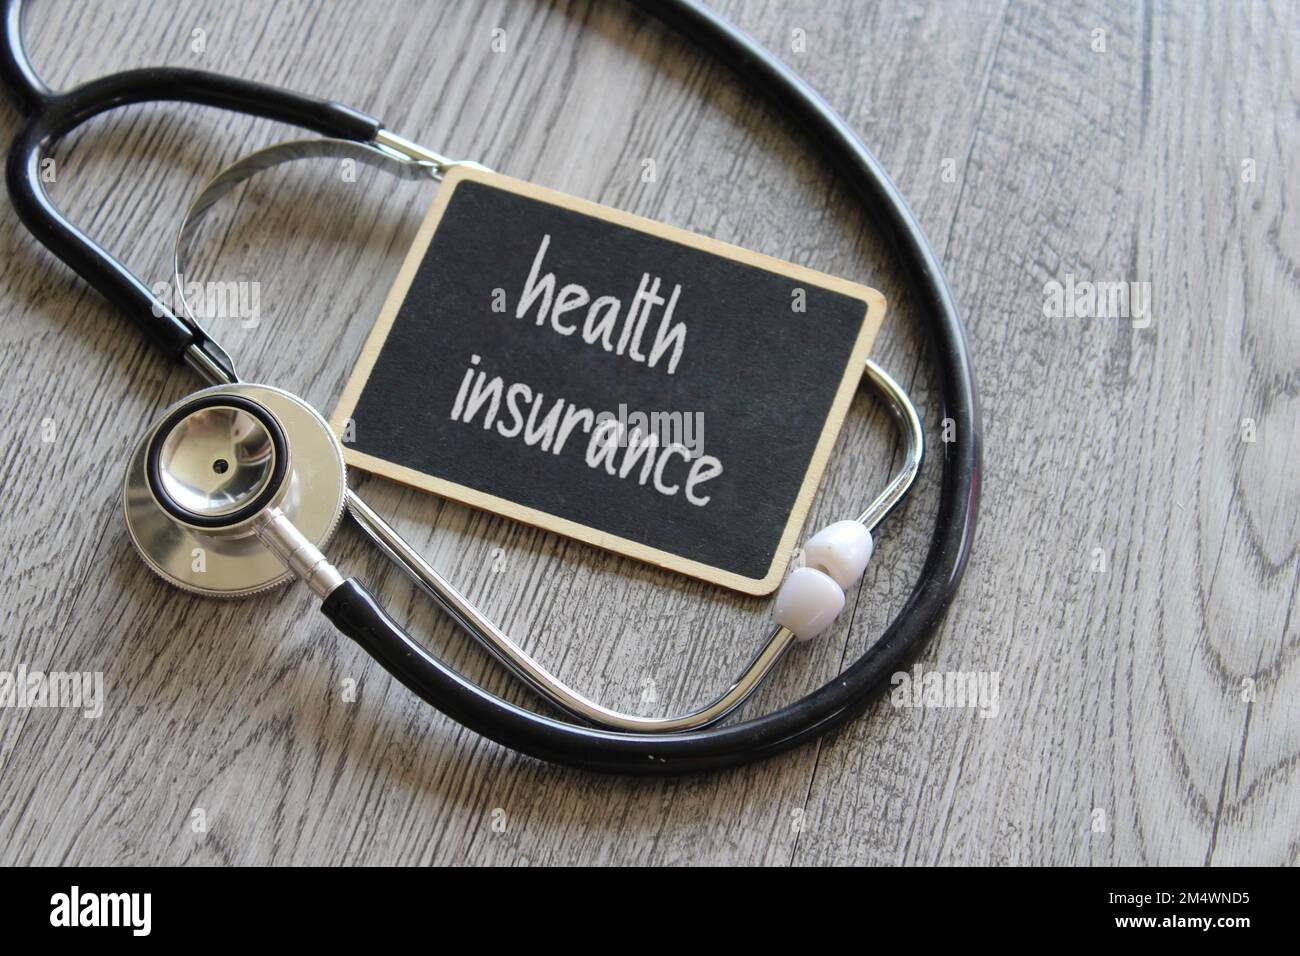 Stethoscope and chalkboard with text HEALTH INSURANCE on wooden table. Medical and healthcare concept Stock Photo